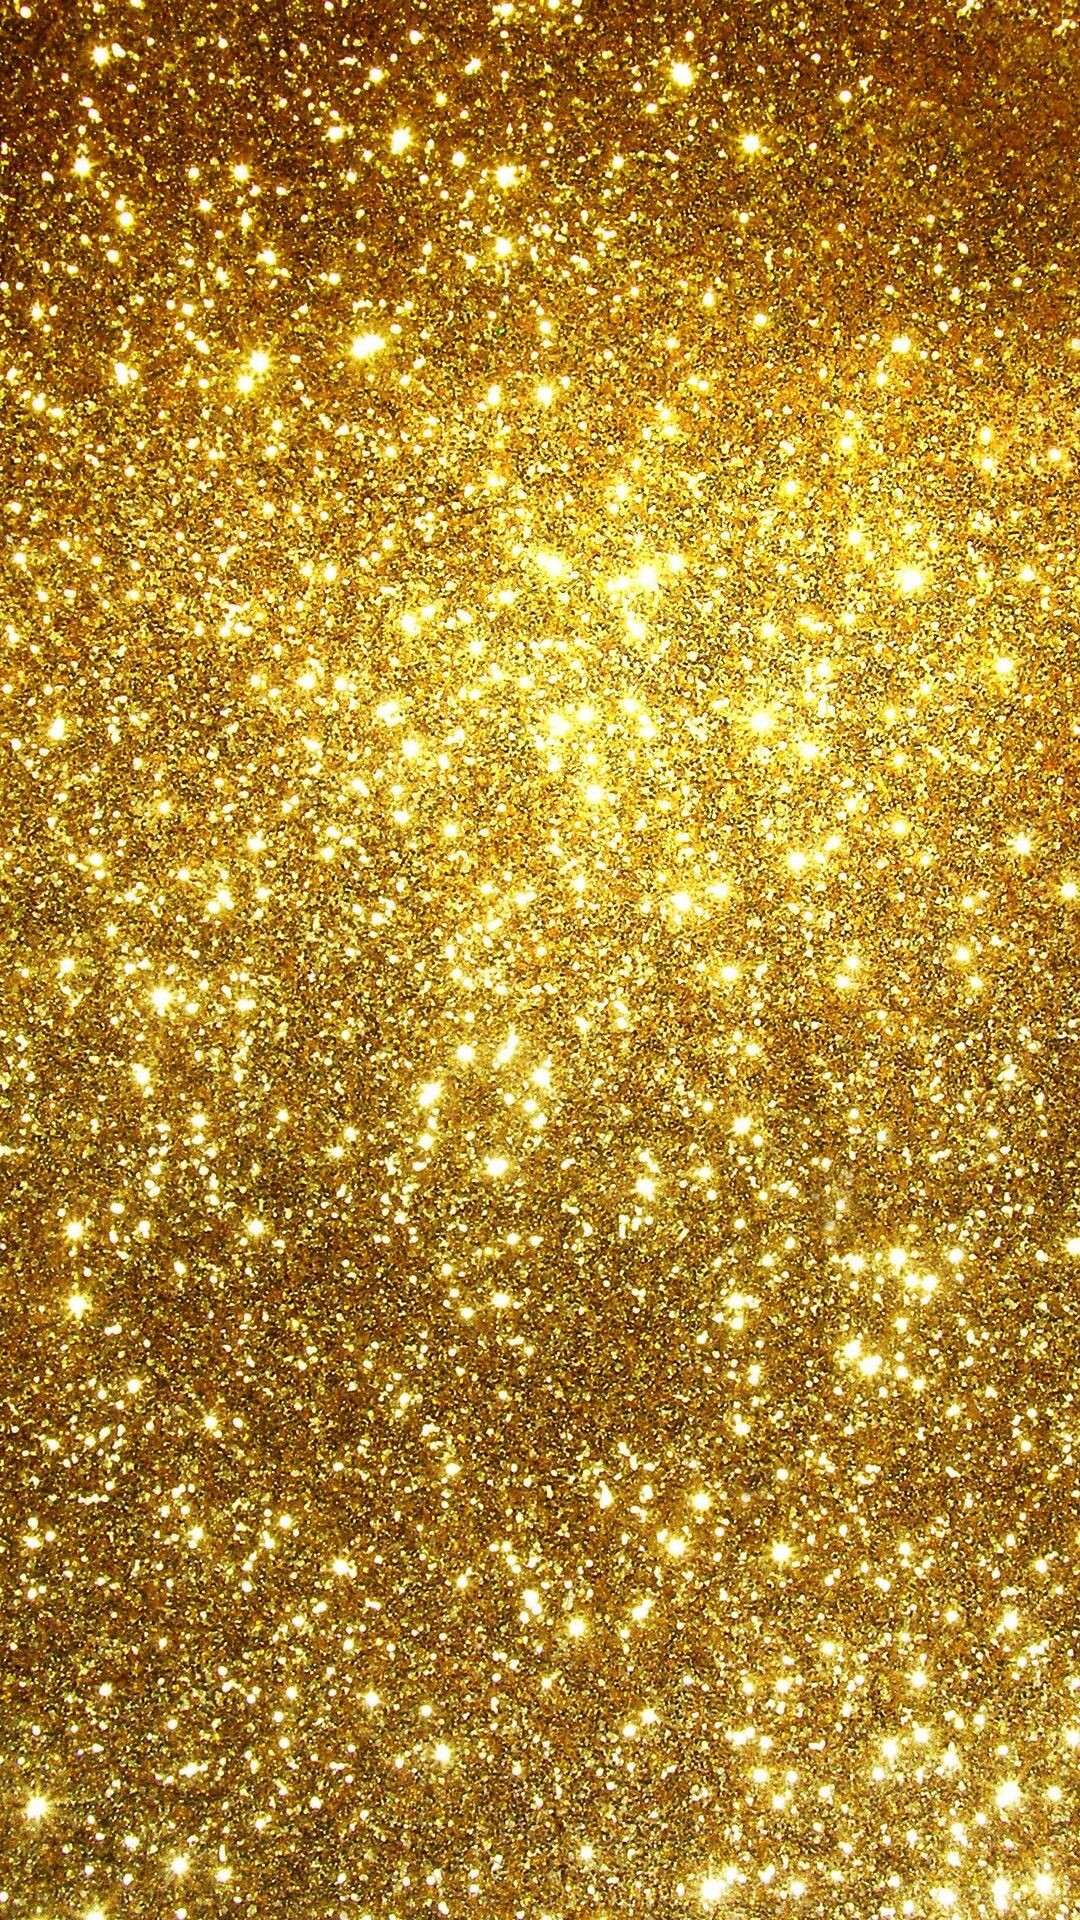 Gold Glitter: The surface decorated with mechanical gilding, Layered golden particles. 1080x1920 Full HD Background.